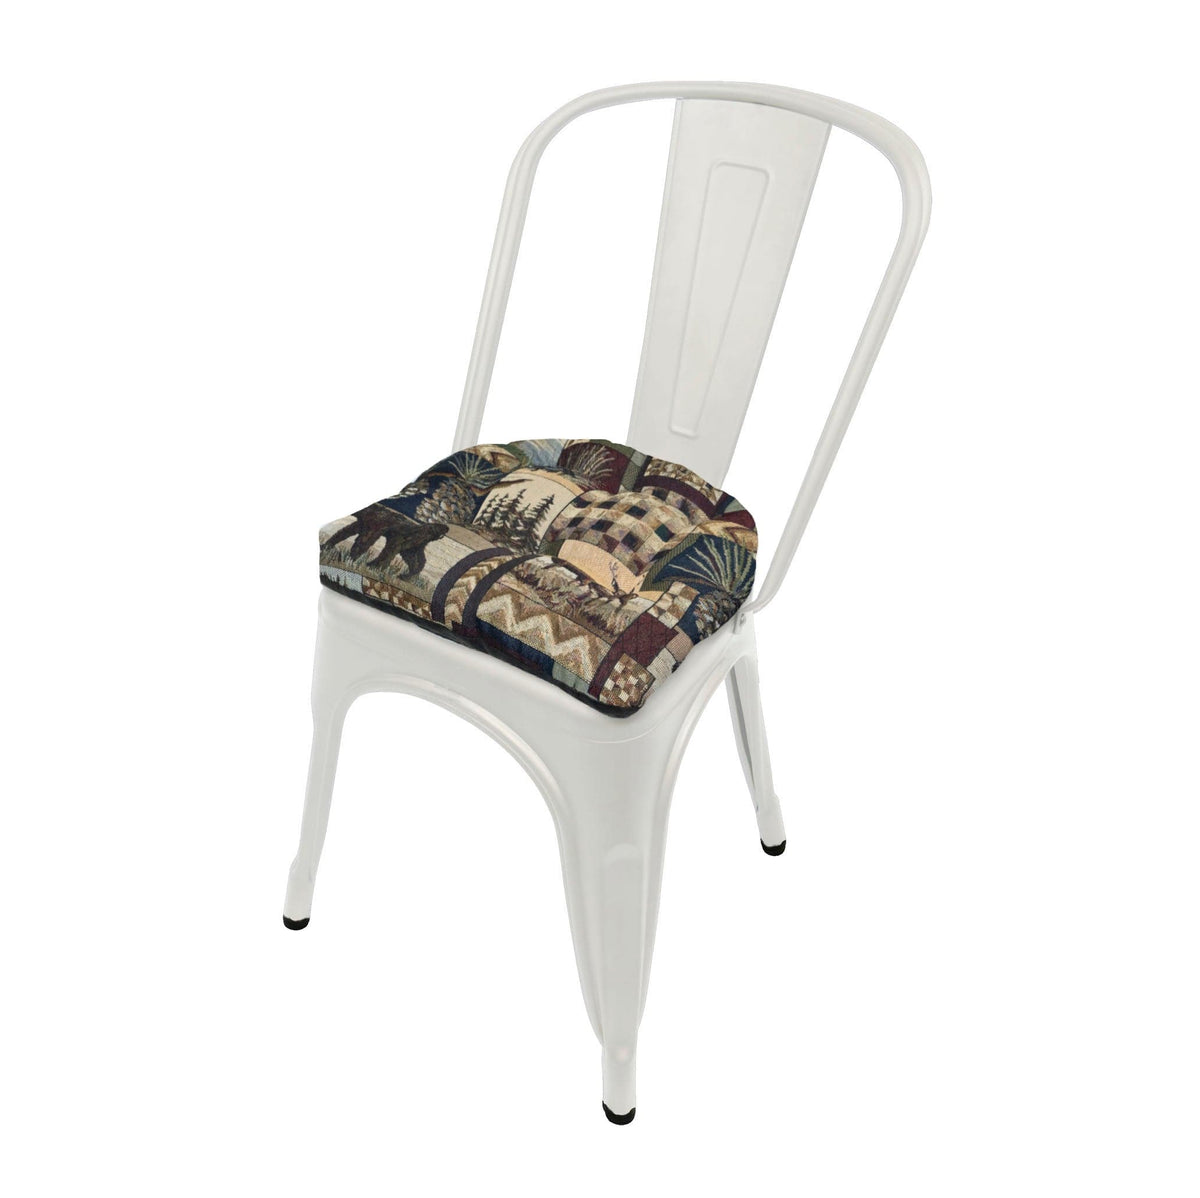 https://www.shopbarnetthomedecor.shop/wp-content/uploads/1695/13/you-can-find-the-top-deals-on-woodlands-peters-cabin-industrial-chair-cushion-latex-foam-fill-reversible-discontinued_0.jpg